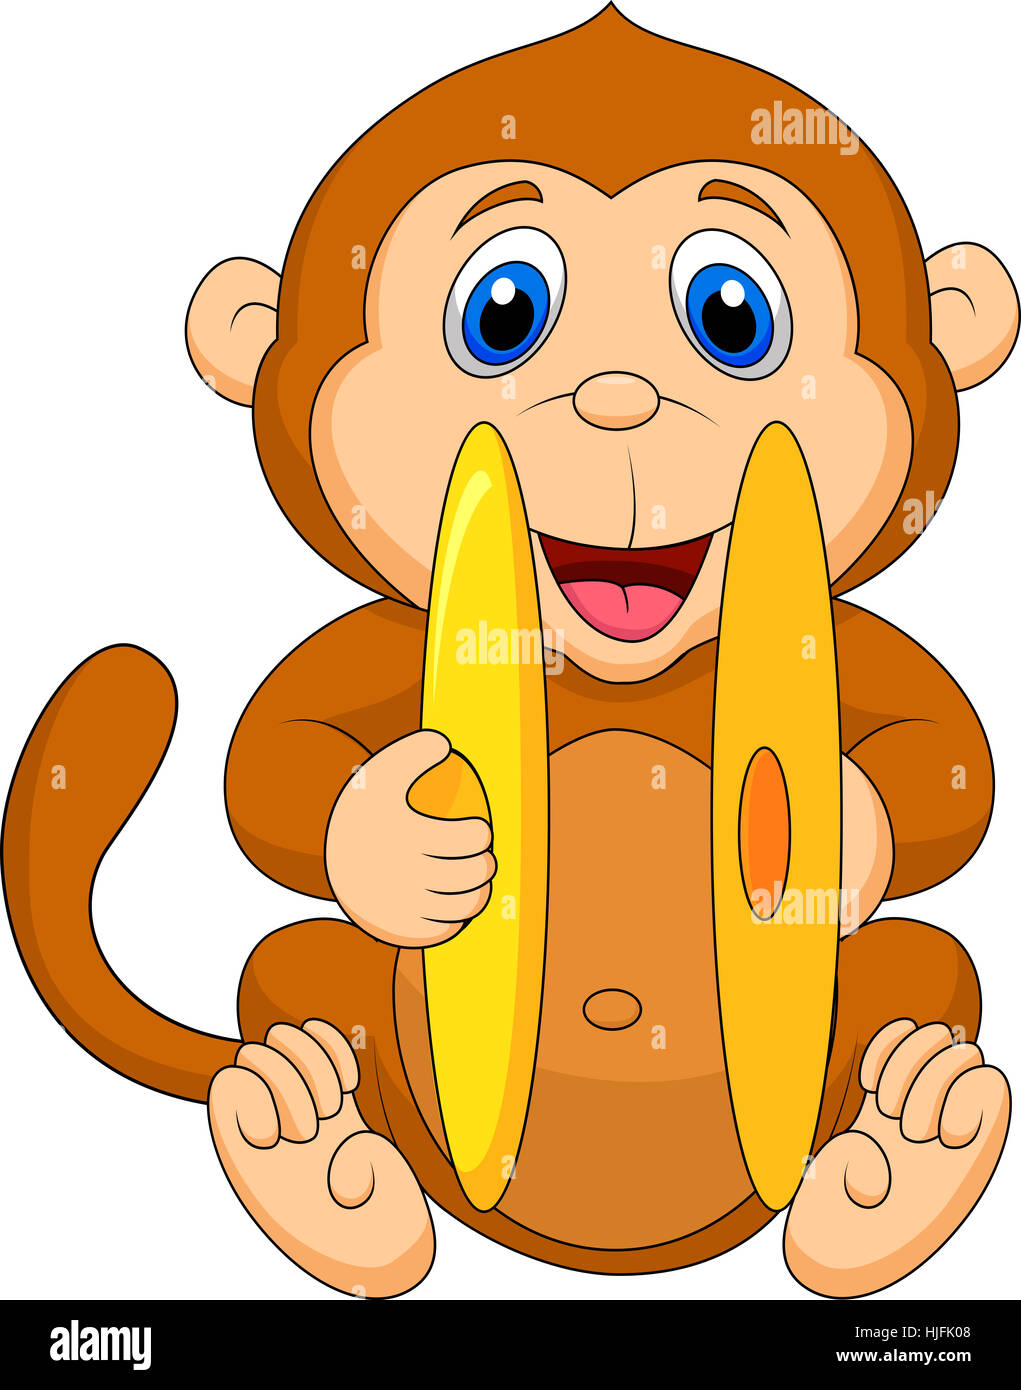 Cymbal monkey Cut Out Stock Images & Pictures - Alamy